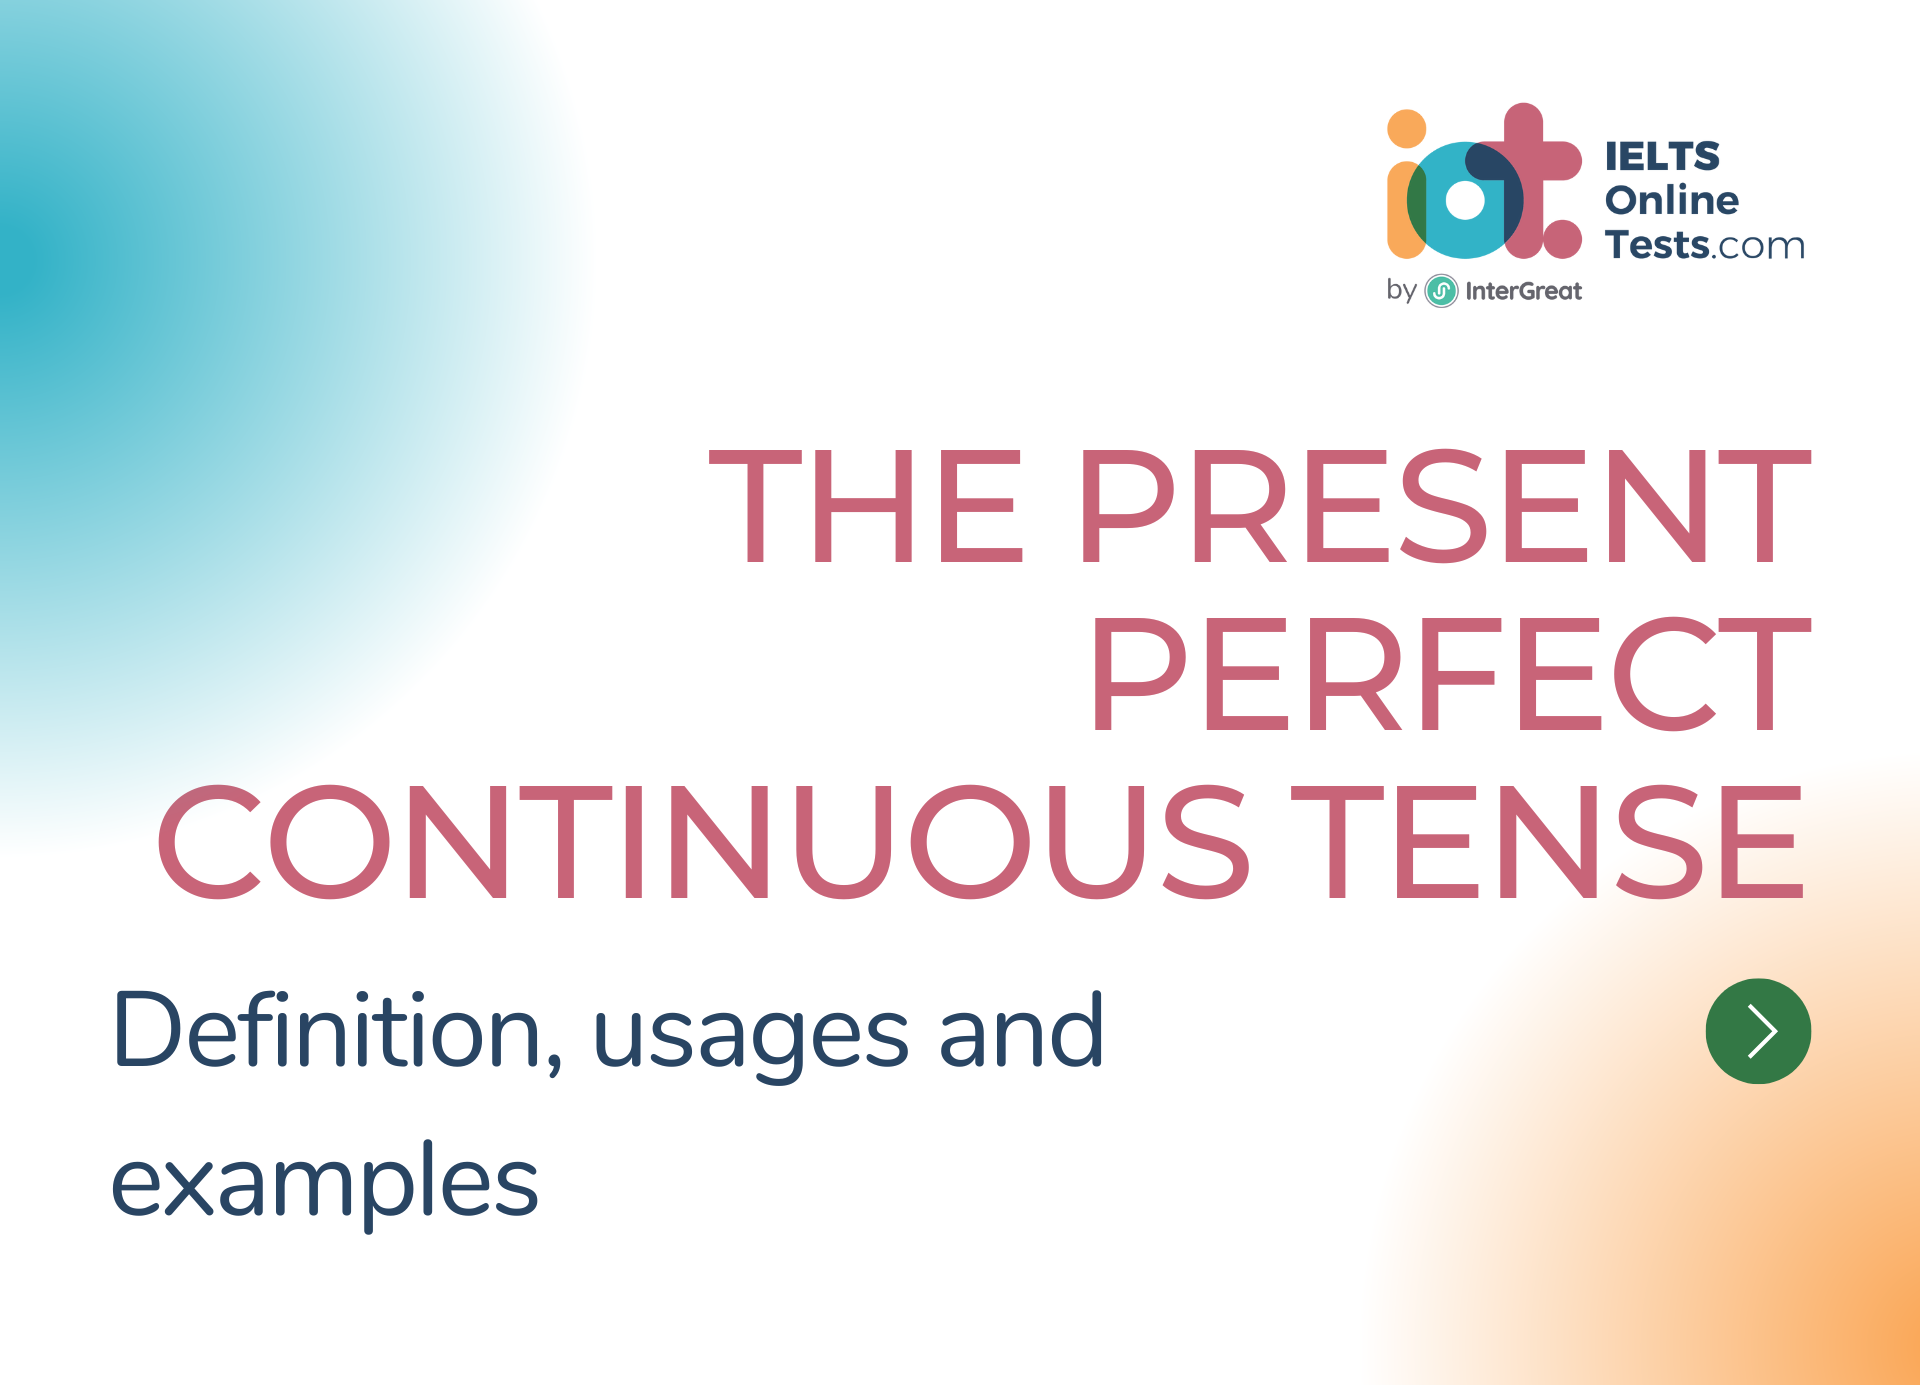 present perfect continuous examples